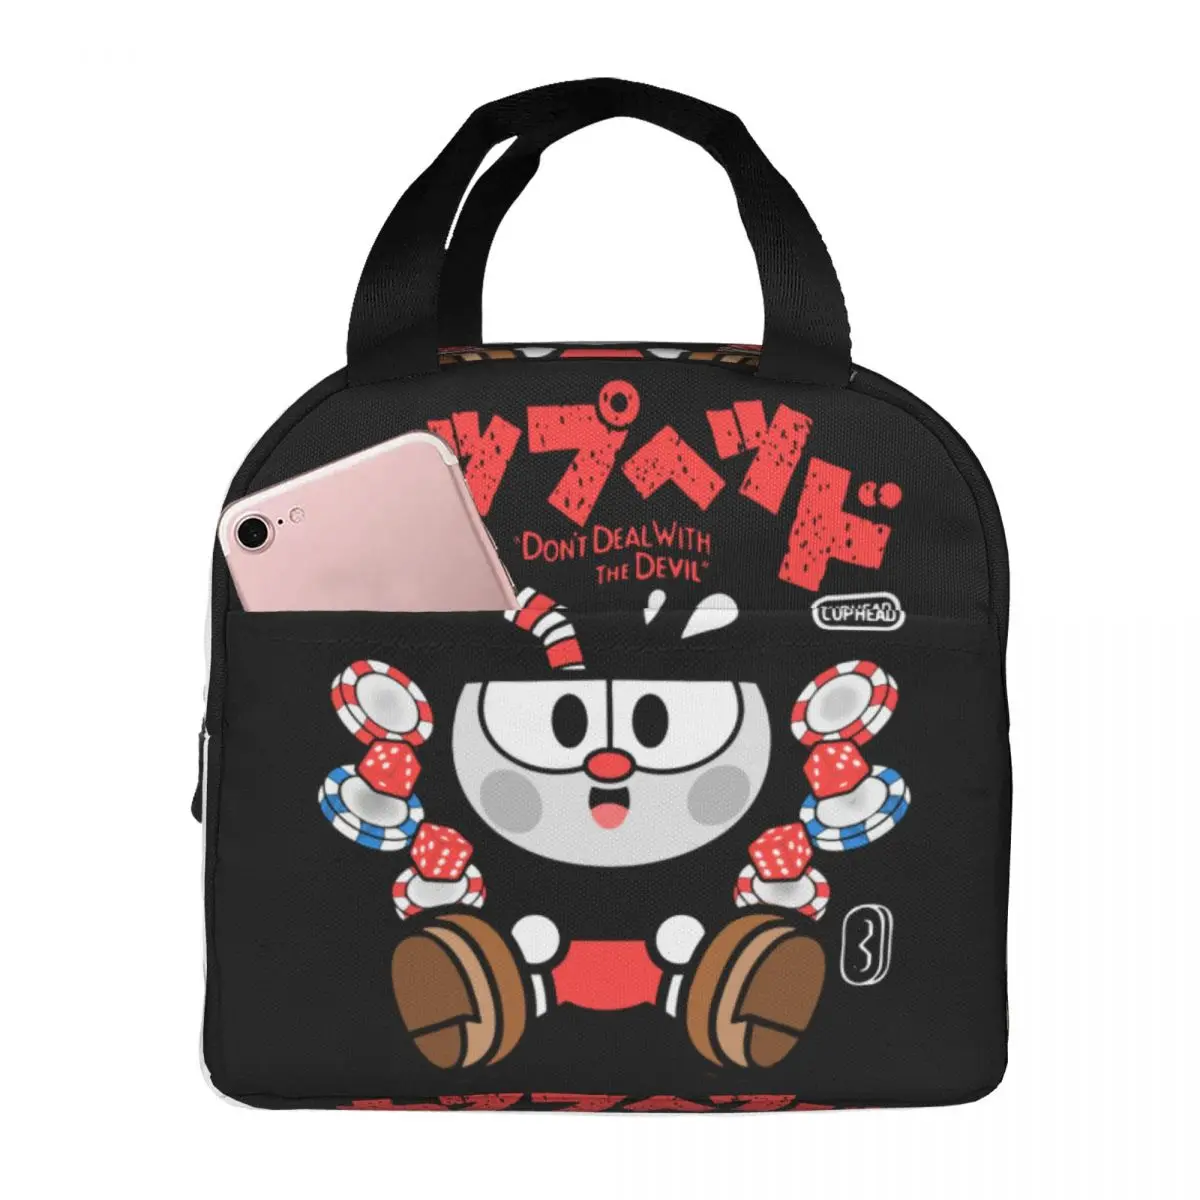 Lunch Bag for Men Women Cuphead Chibi Insulated Cooler Waterproof Picnic Canvas Tote Food Bag